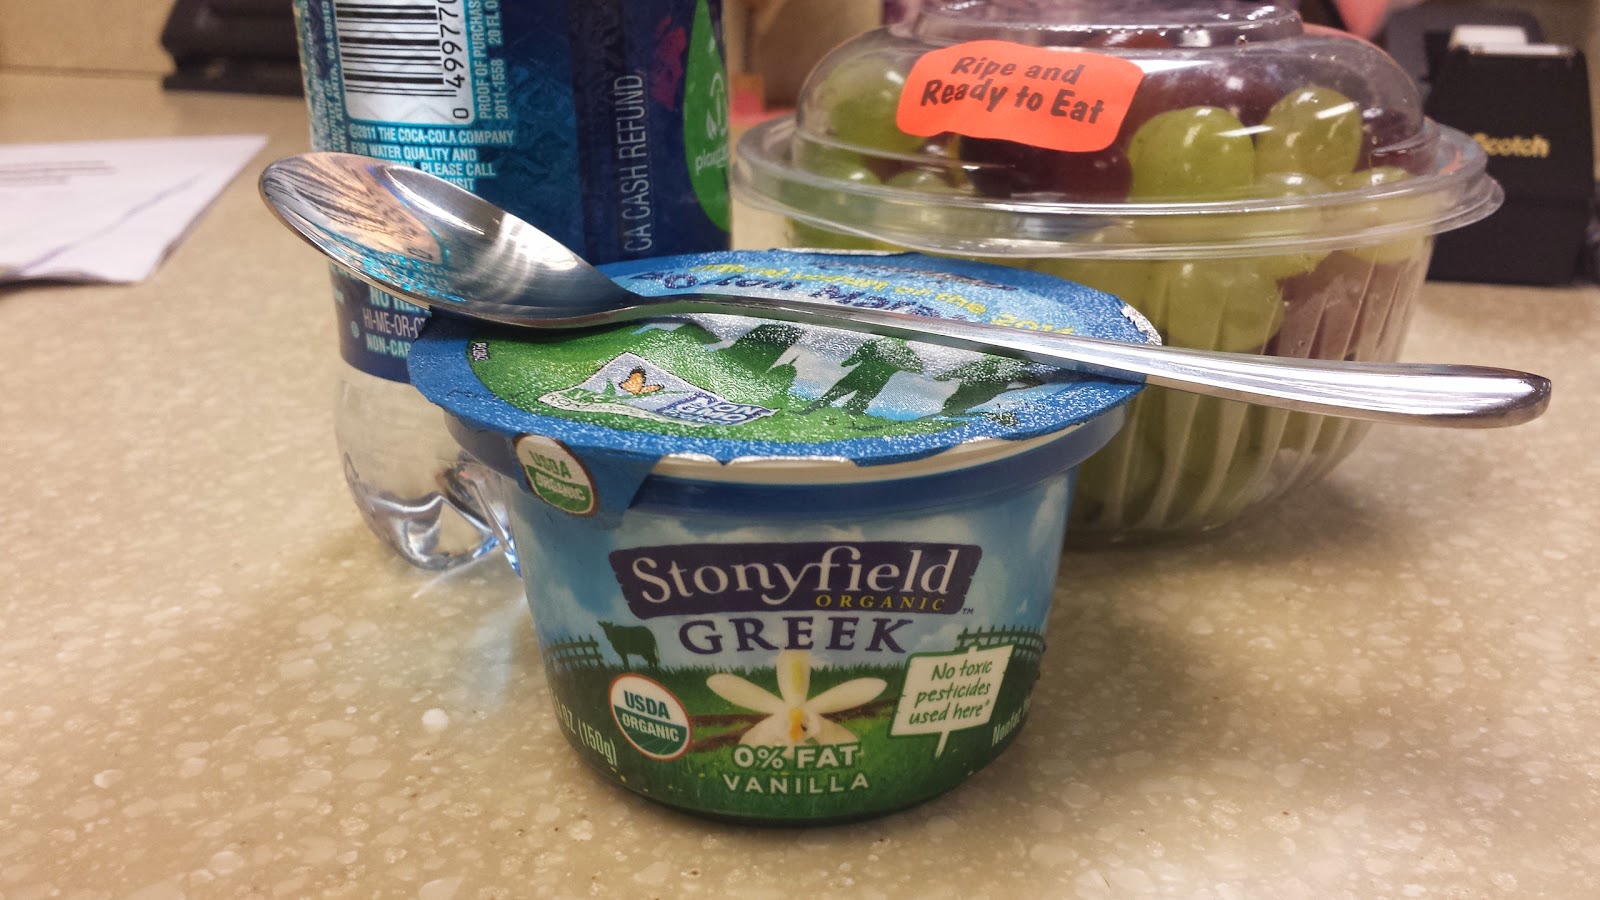 Stonyfield Organic Greek Yogurt Review and Giveaway ends 4/23 via ProductReviewMom.com